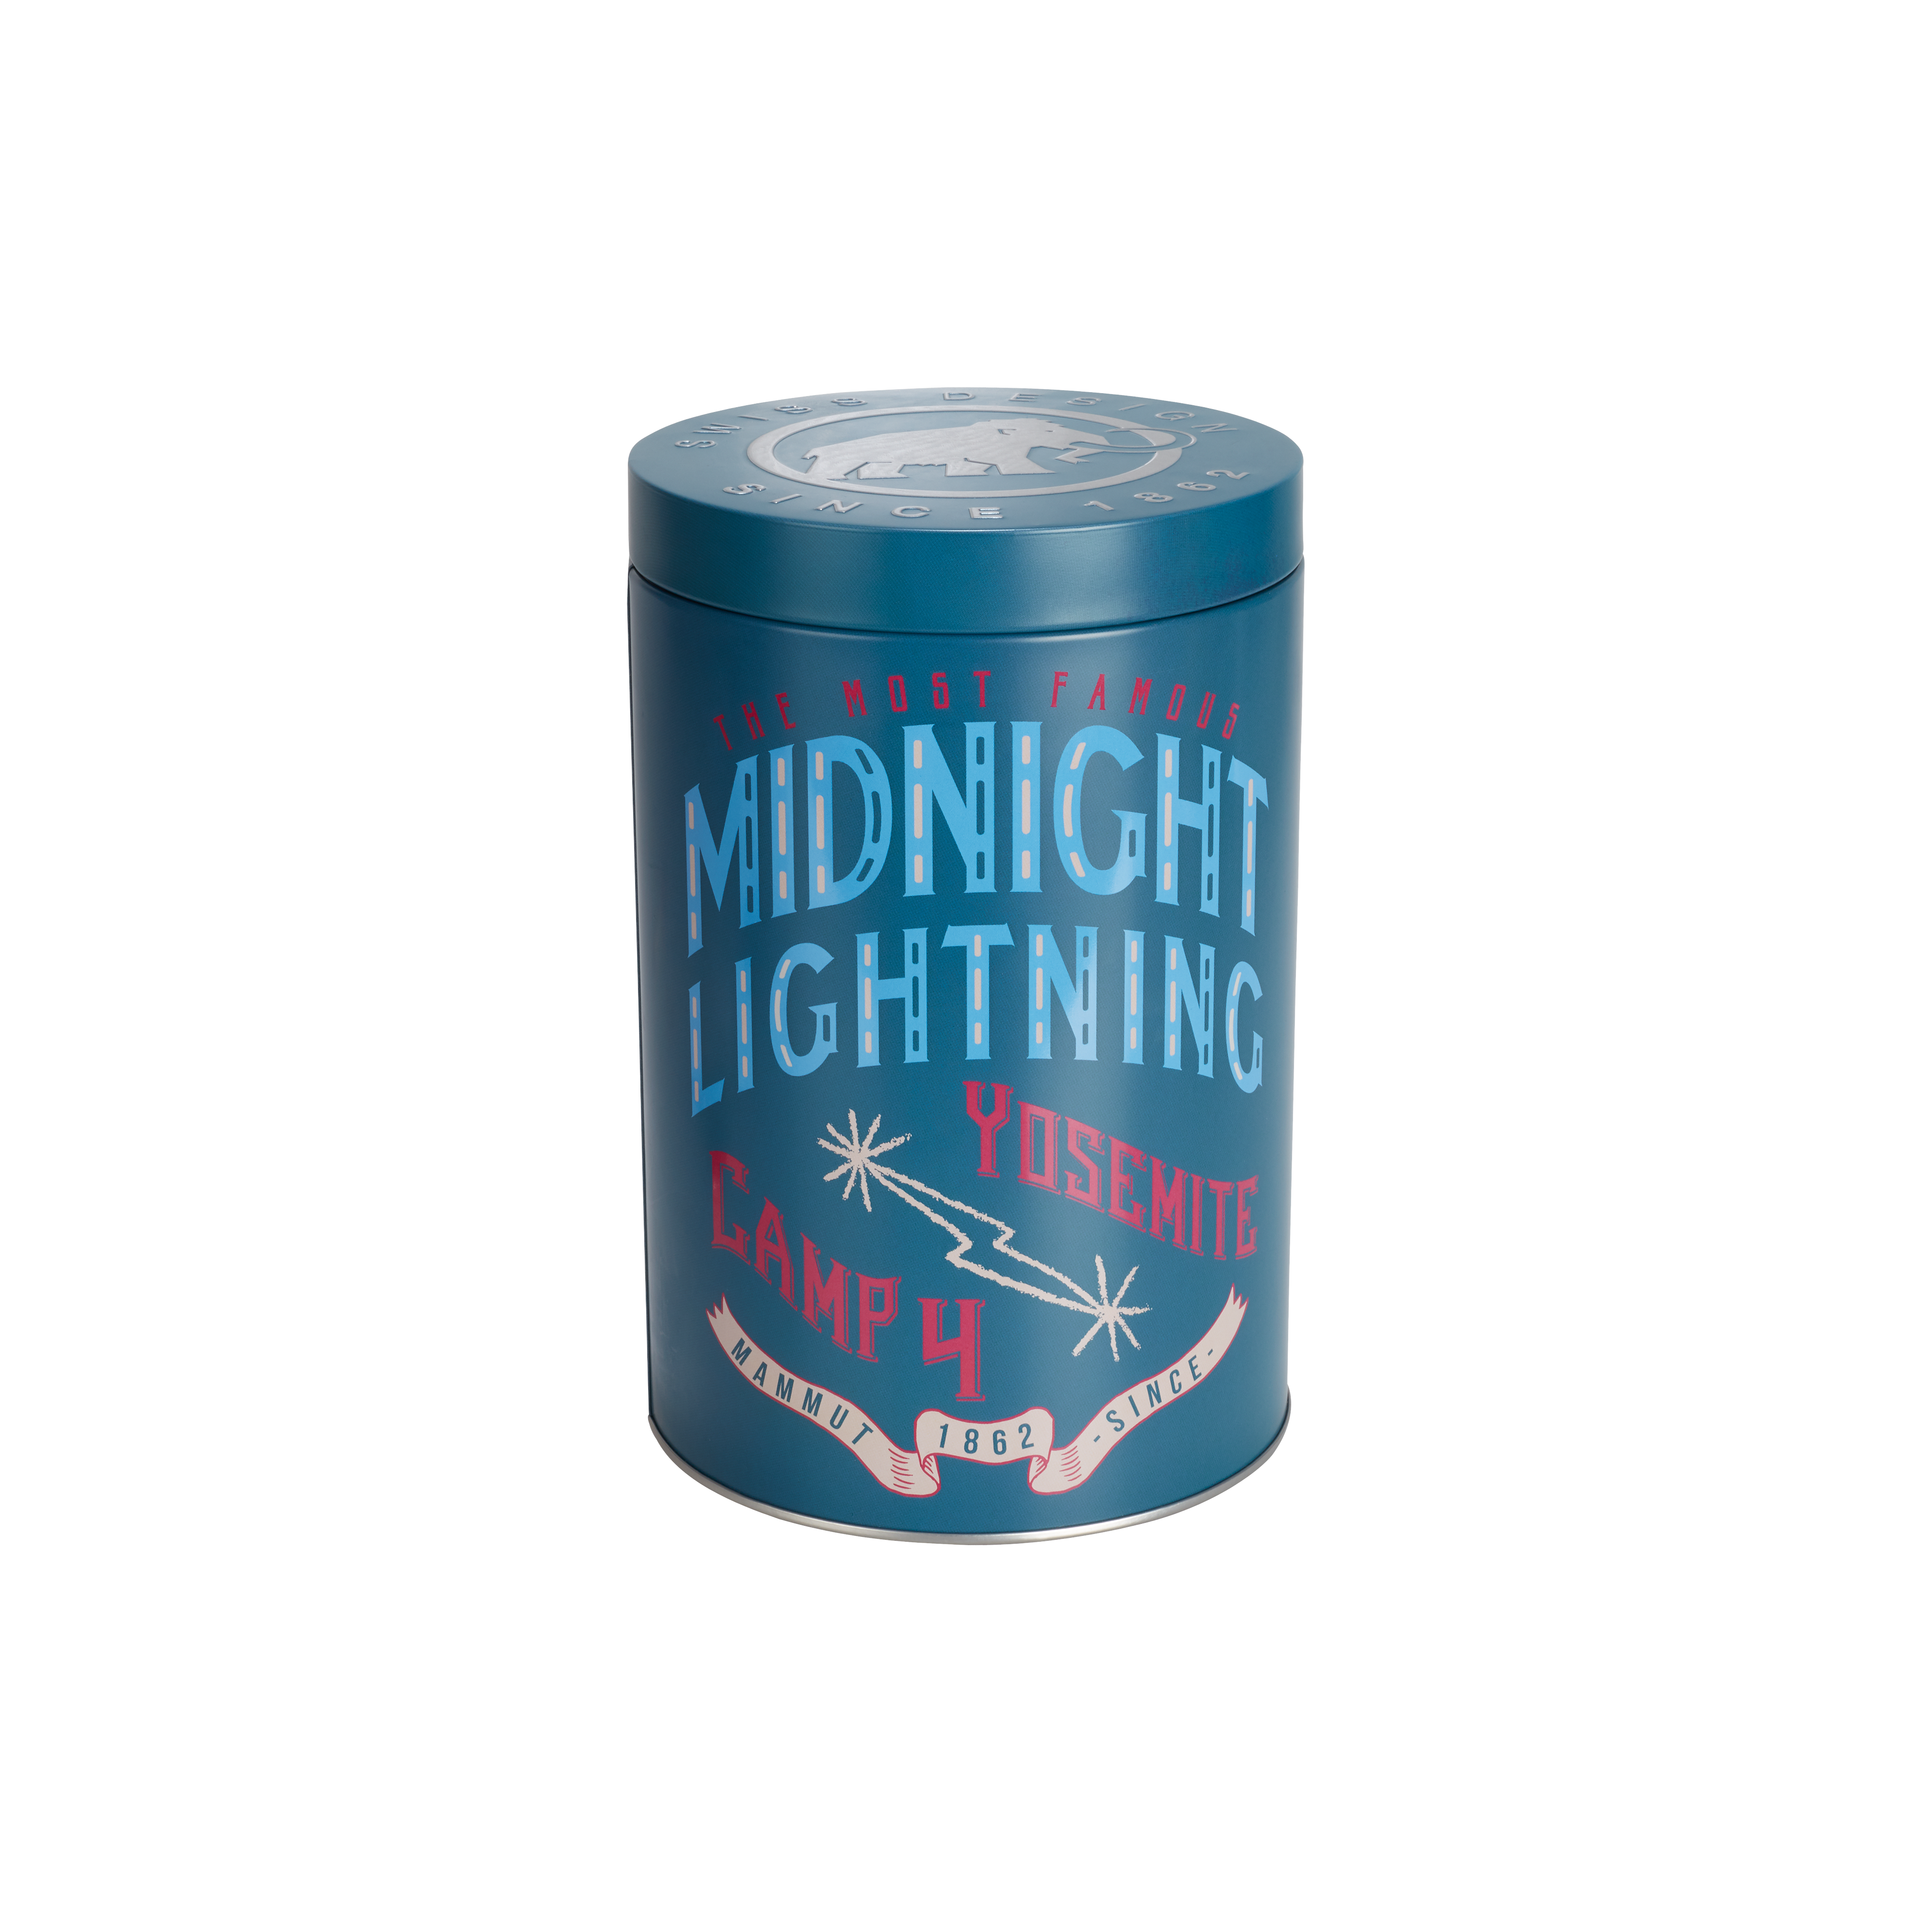 Pure Chalk Collectors Box - midnight lightning, one size thumbnail